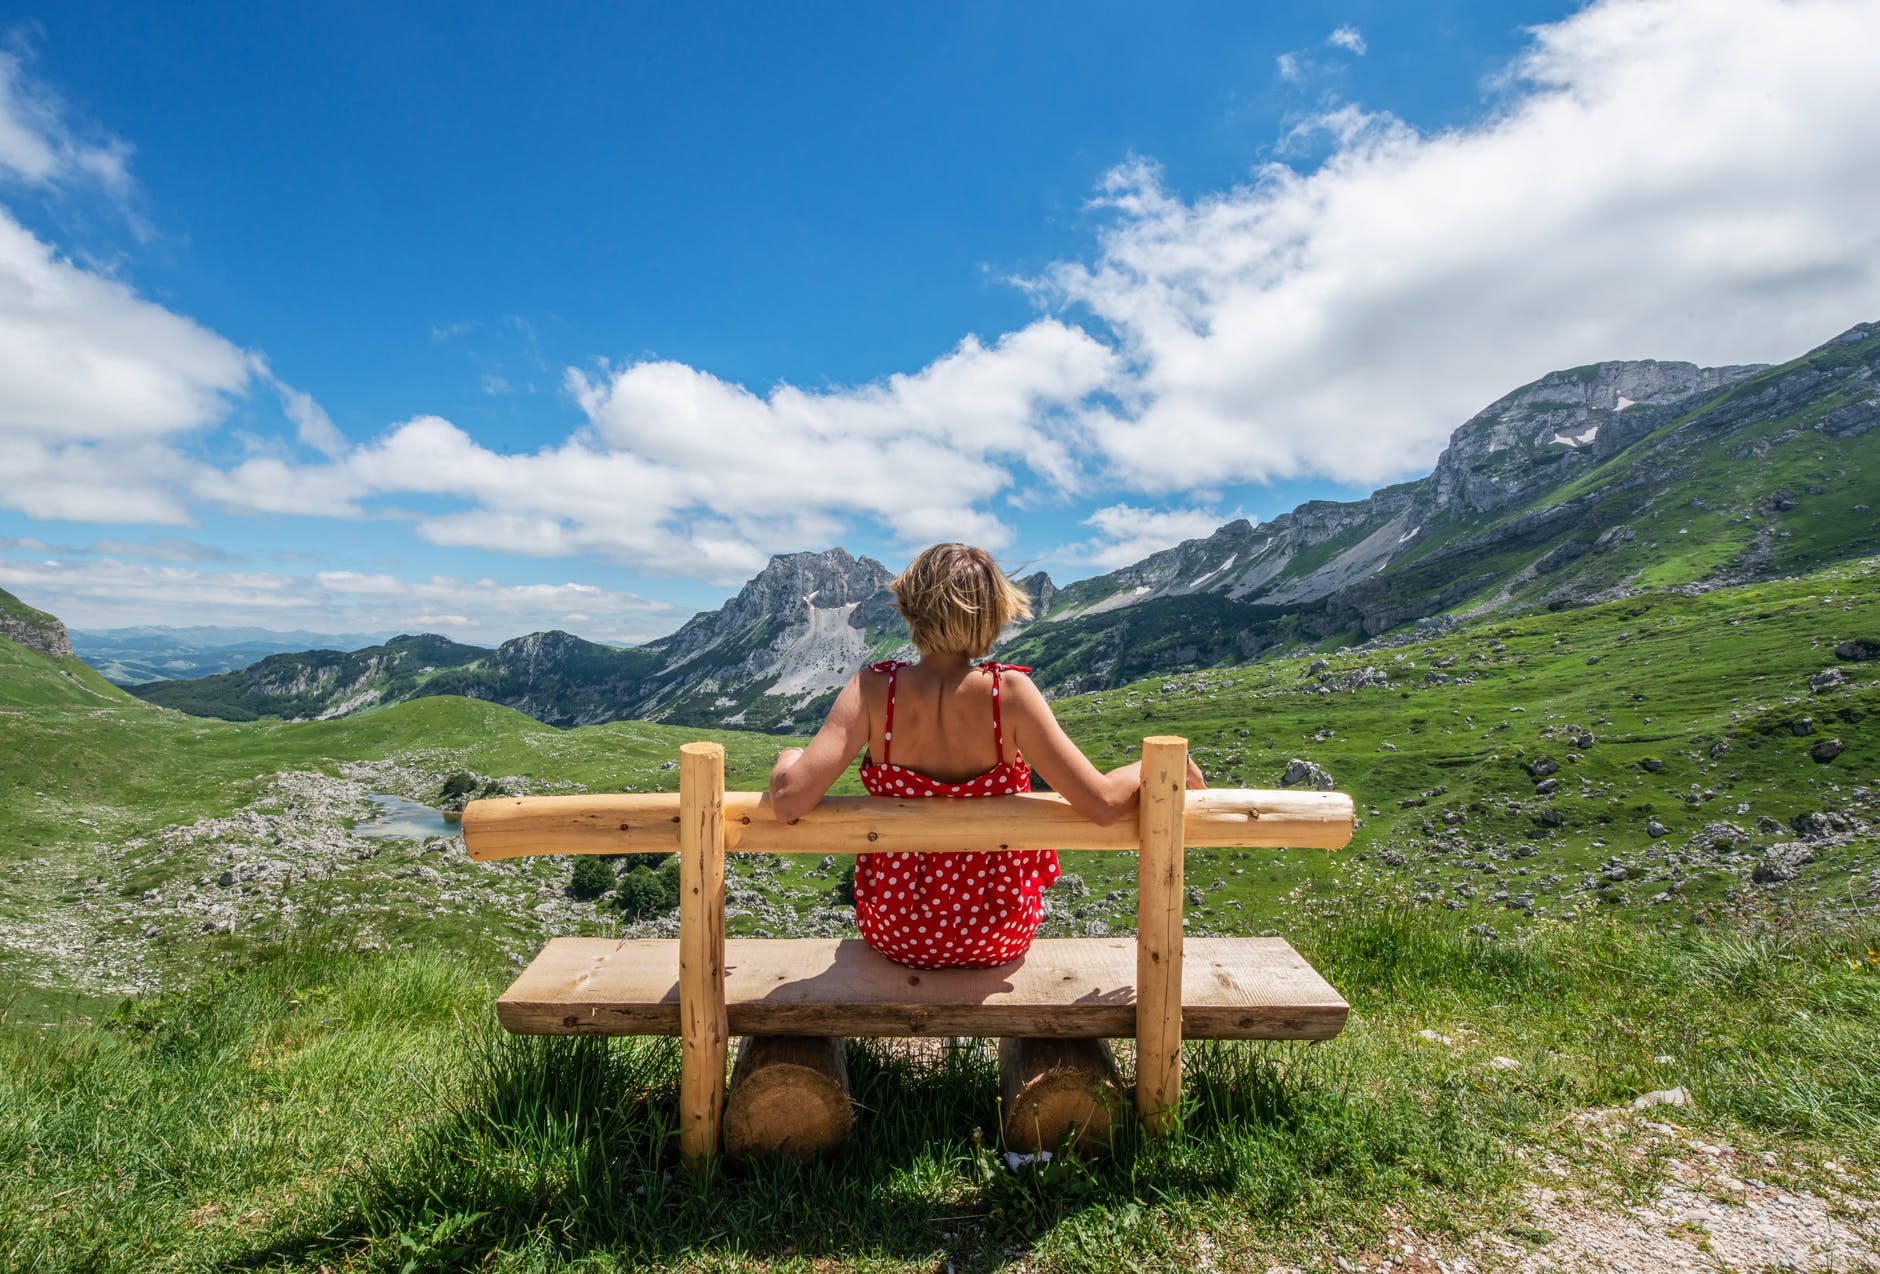 woman resting on wooden bench in meadow with fresh grass